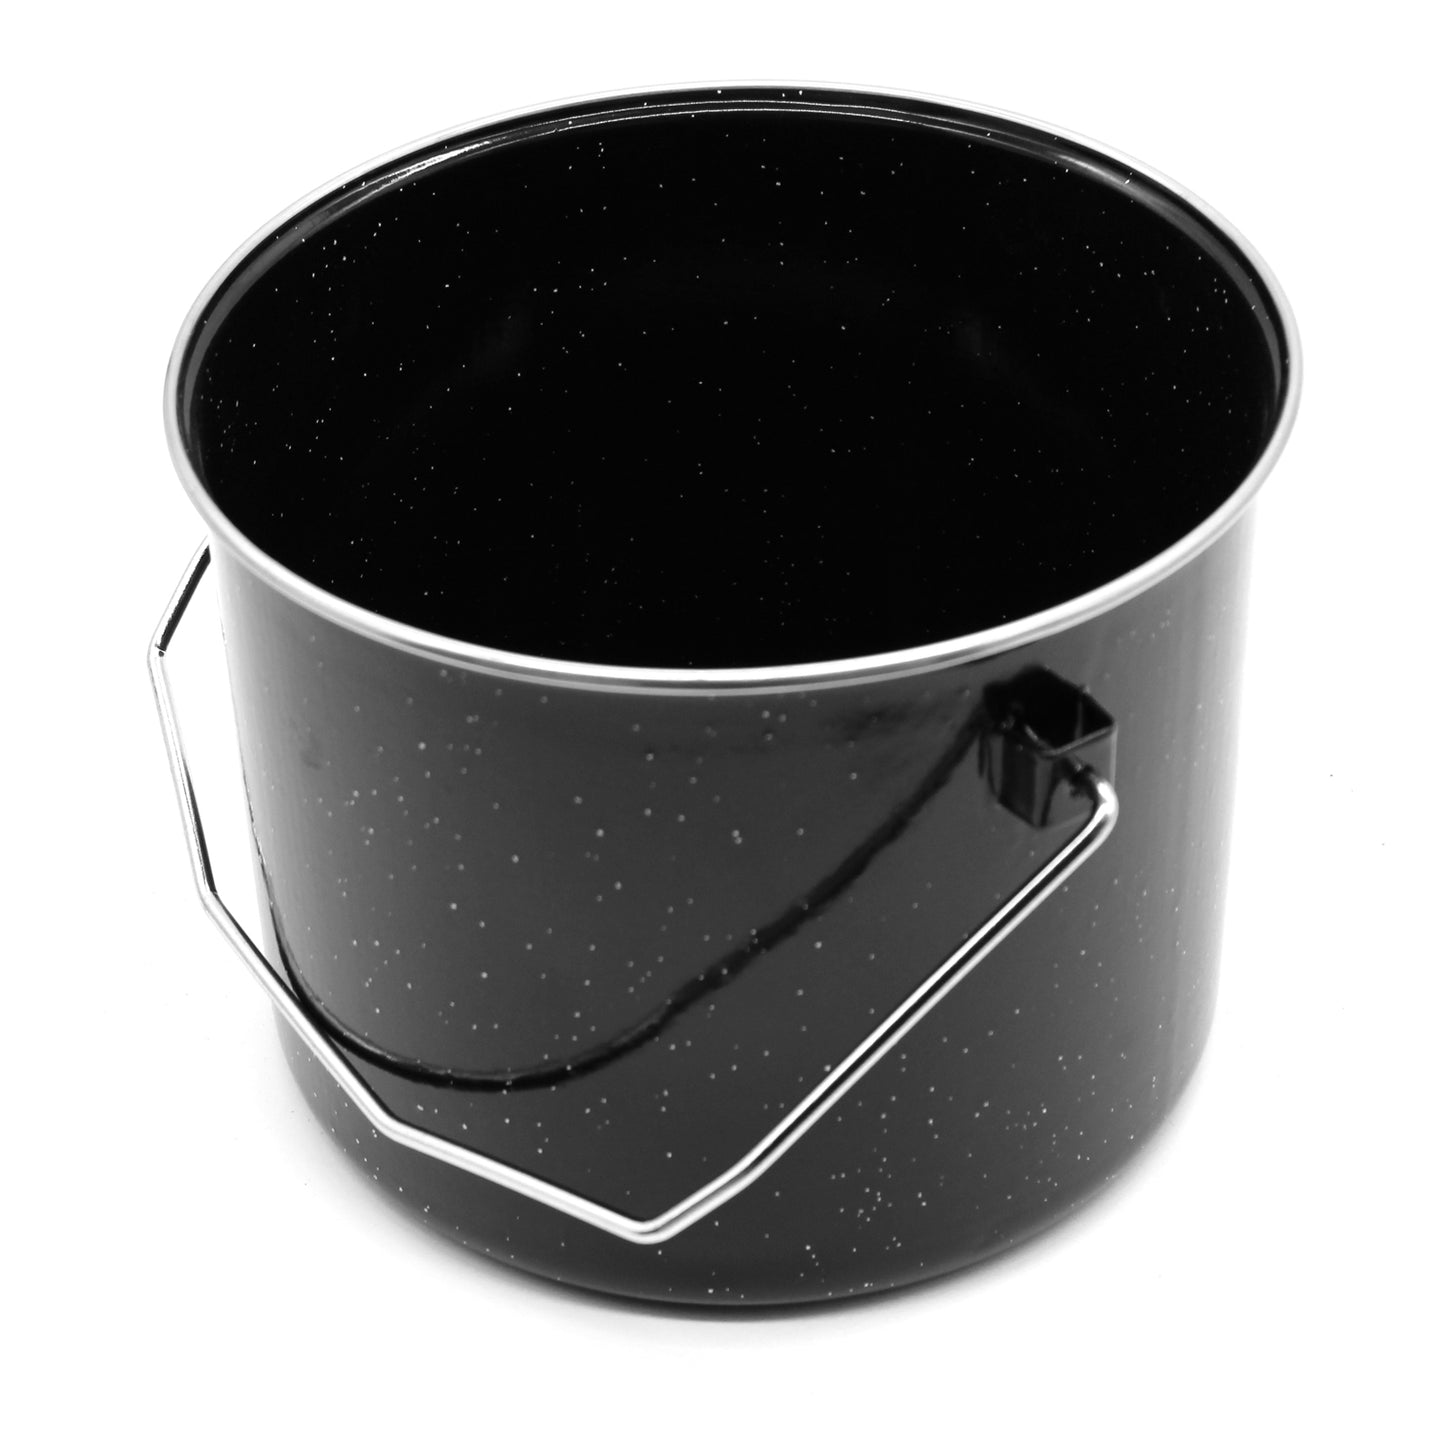 Pot for cooking campfire meals